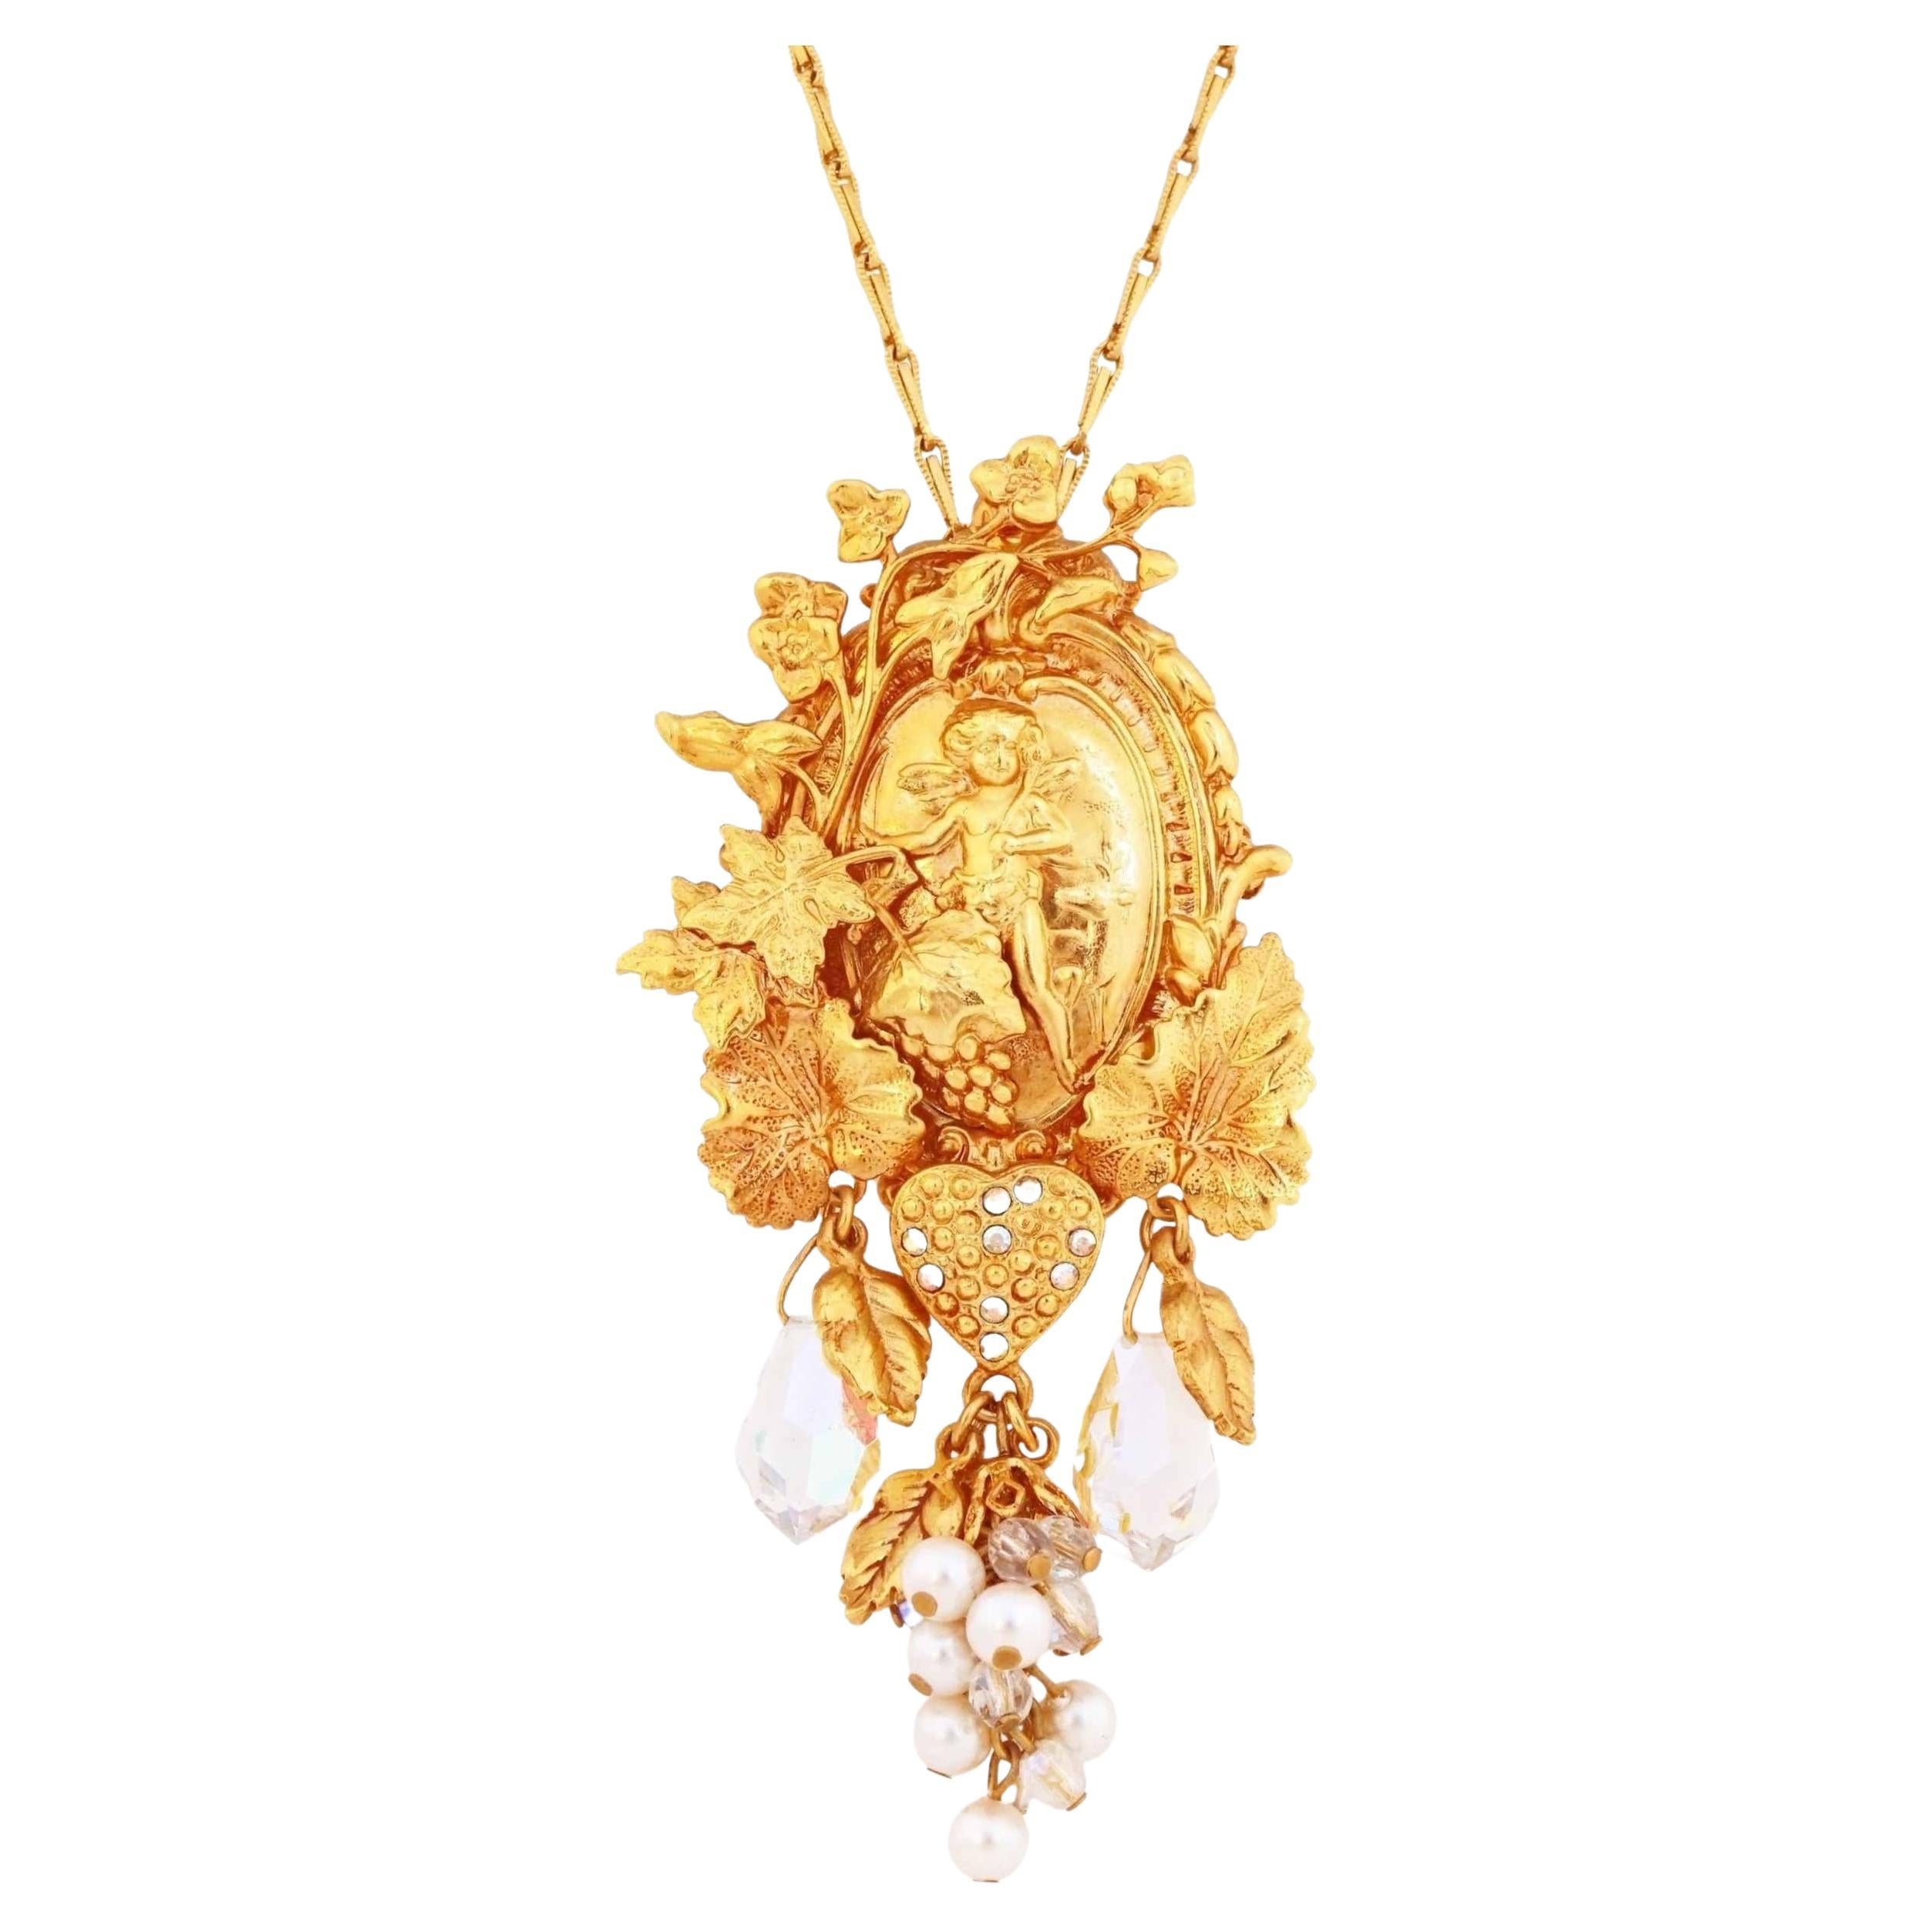 Ornate Gold Angel Pendant Necklace With Pearl & Crystal Charms By Kirks Folly For Sale